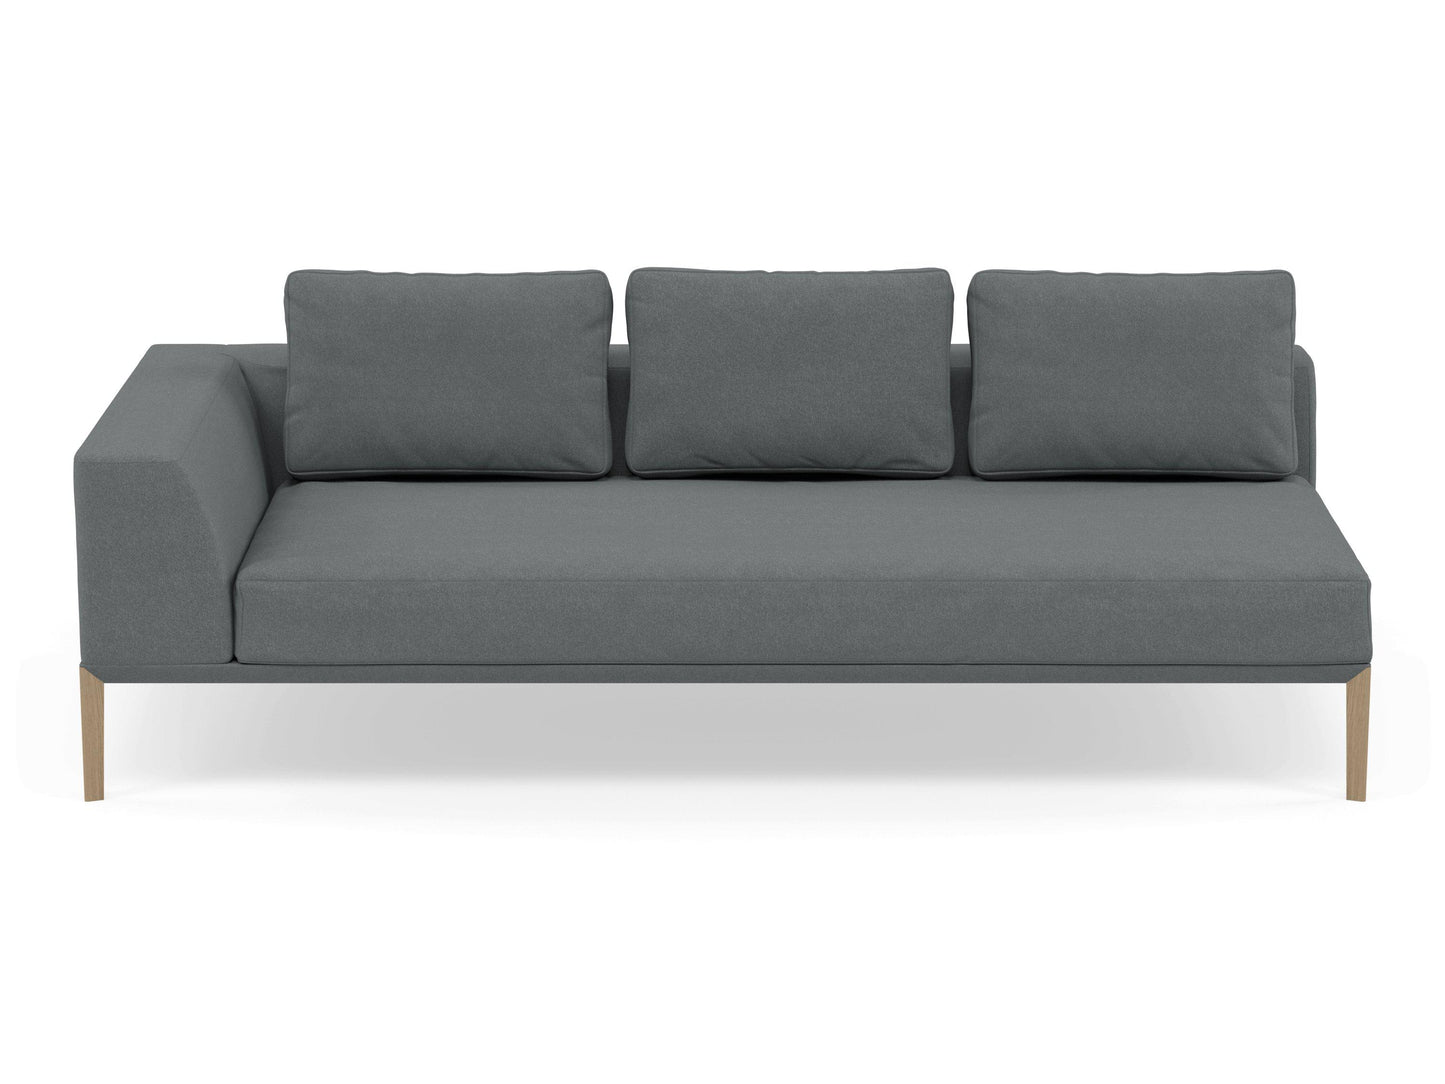 Modern 3 Seater Chaise Lounge Style Sofa with Right Armrest in Sea Spray Blue Fabric-Natural Oak-Distinct Designs (London) Ltd